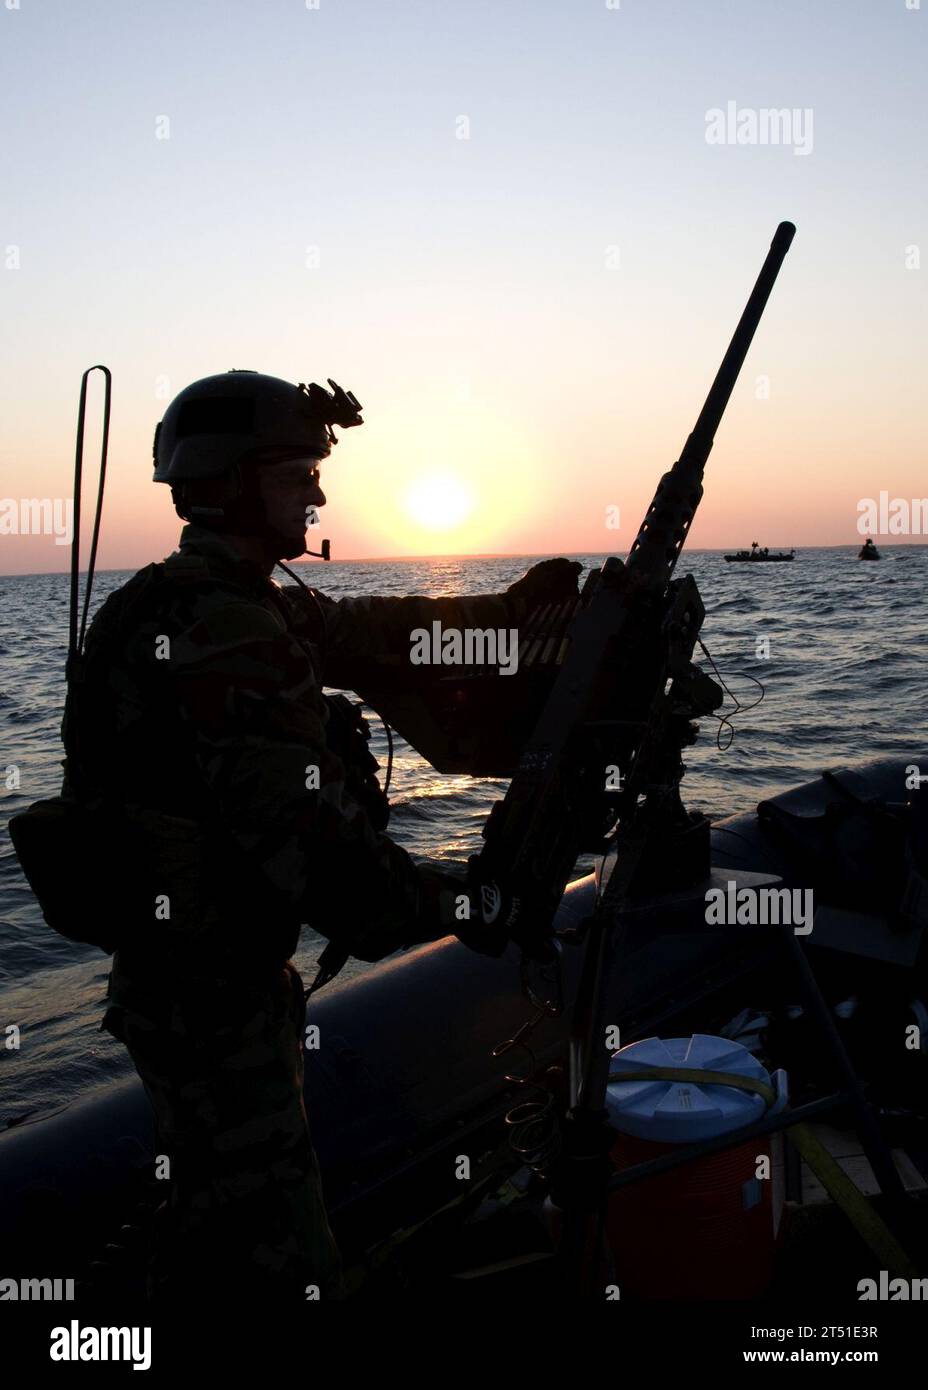 0809034500G-416 PINEY ISLAND, N.C. (Sept. 3, 2008) A Special Warfare Combatant-craft Crewman (SWCC) from Special Boat Team 20 holds a .50-caliber machine gun steady in between live-fire drills on the Pamlico Sound. Several Naval Special Warfare 11-meter rigid-hull inflatable boat detachments participated in the training, which included training on grenade launchers and .50-caliber machine guns preparing for an upcoming deployment supporting the Global War on Terror. Navy Stock Photo